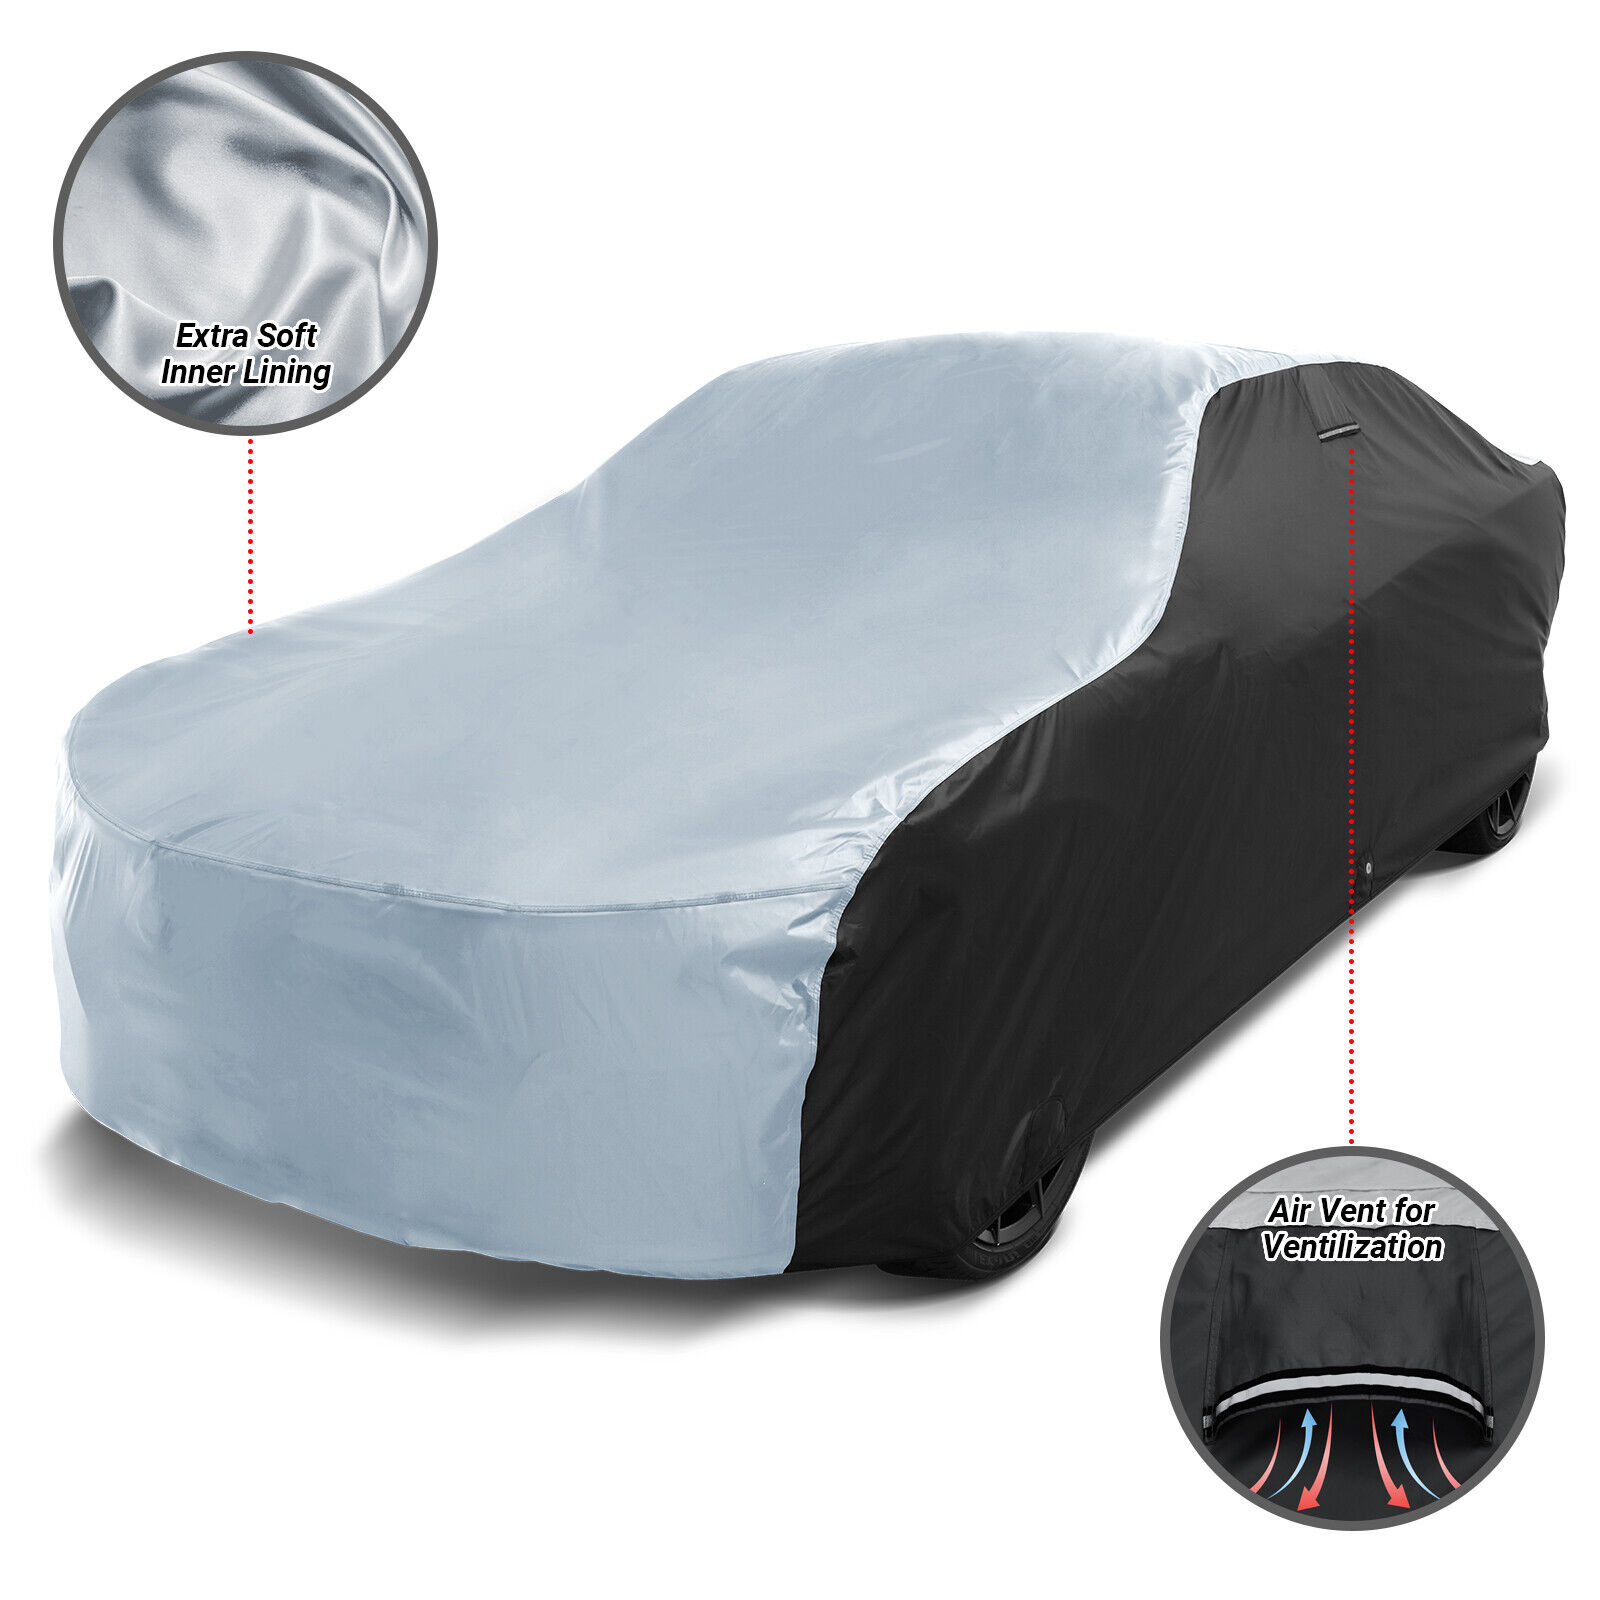 For FERRARI [575M MARANELLO] Custom-Fit Outdoor Waterproof All Weather Car Cover